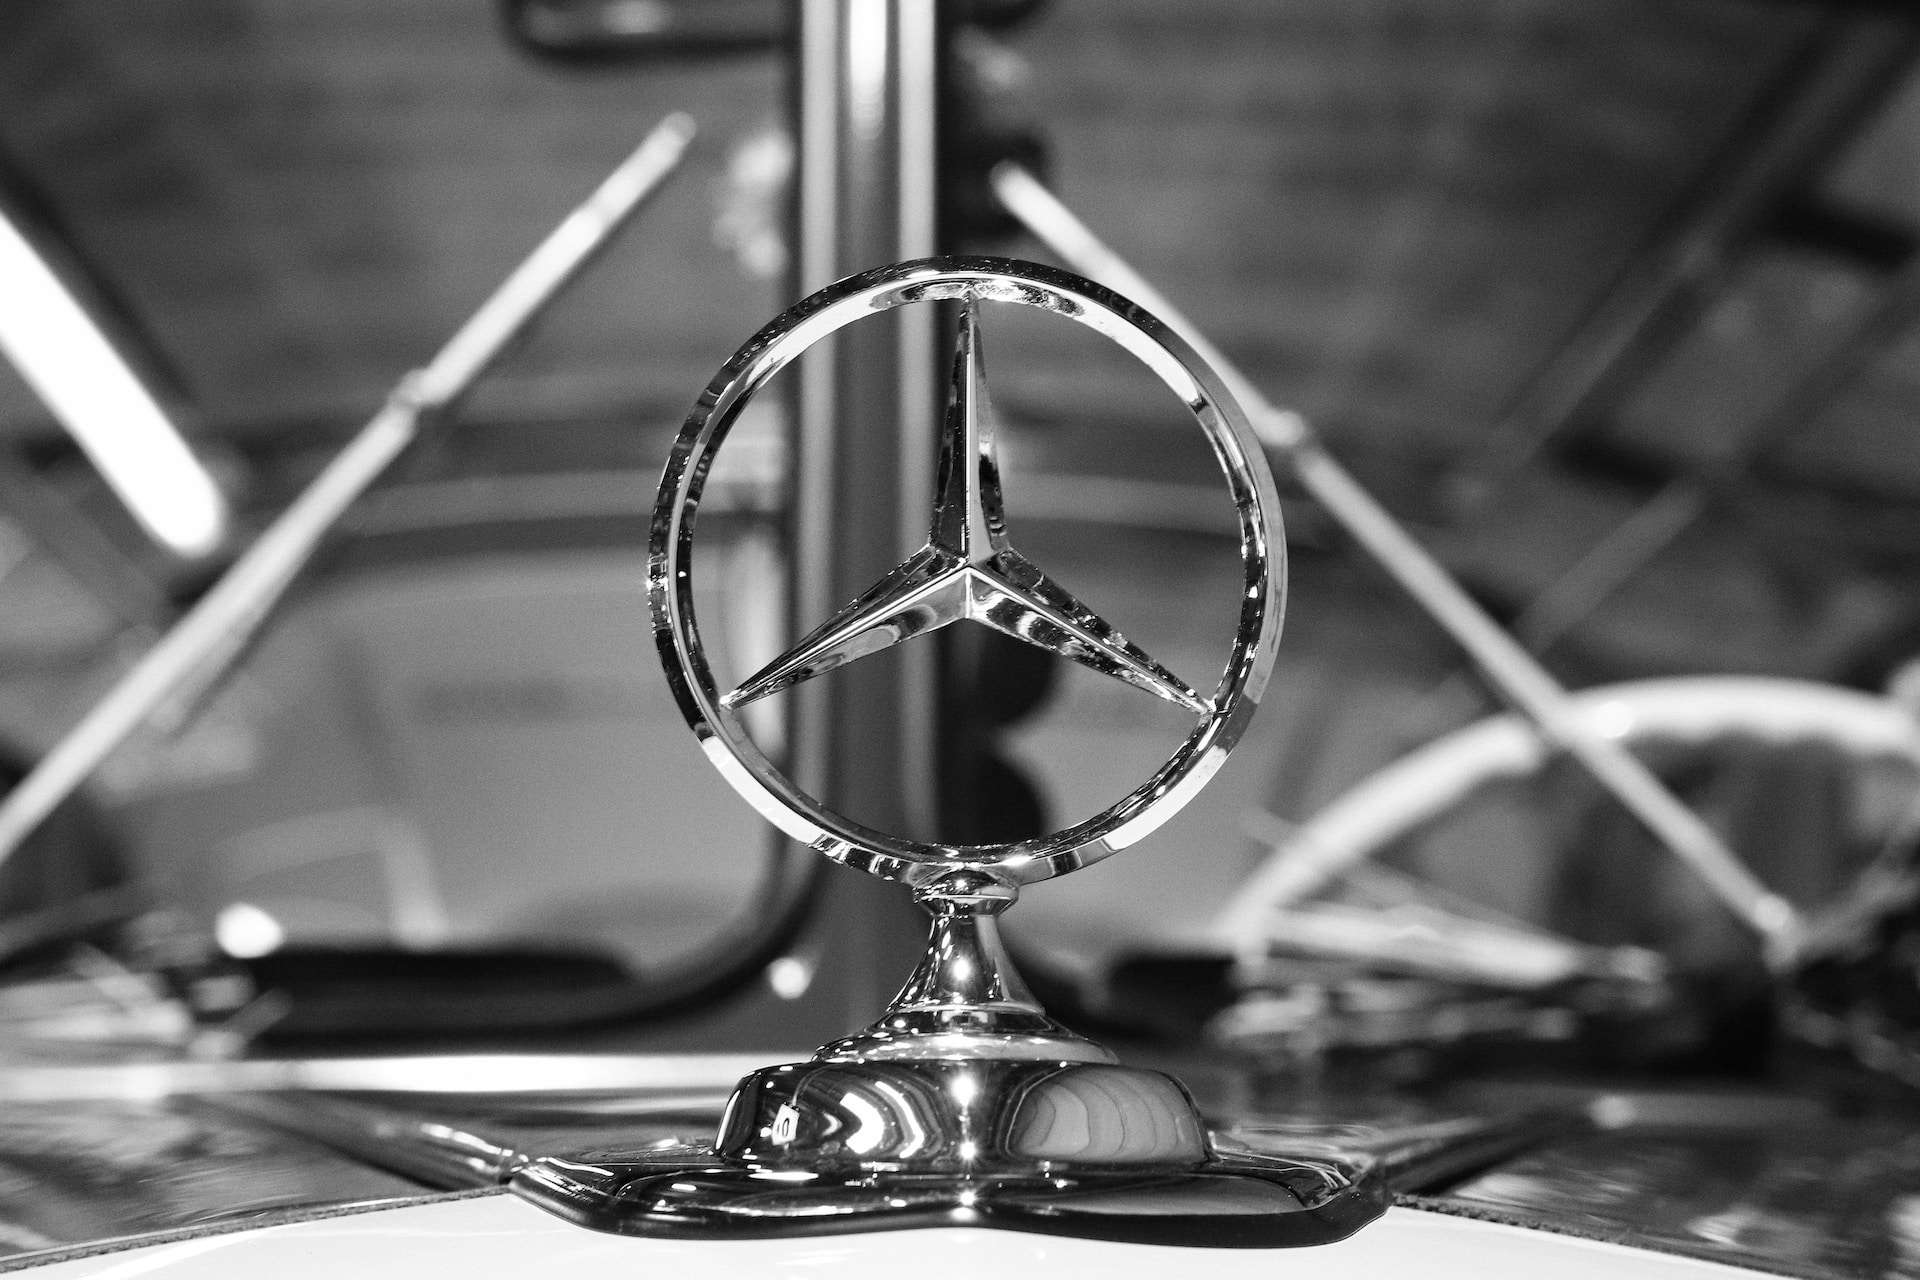 The origins of Mercedes' three-pointed star logo